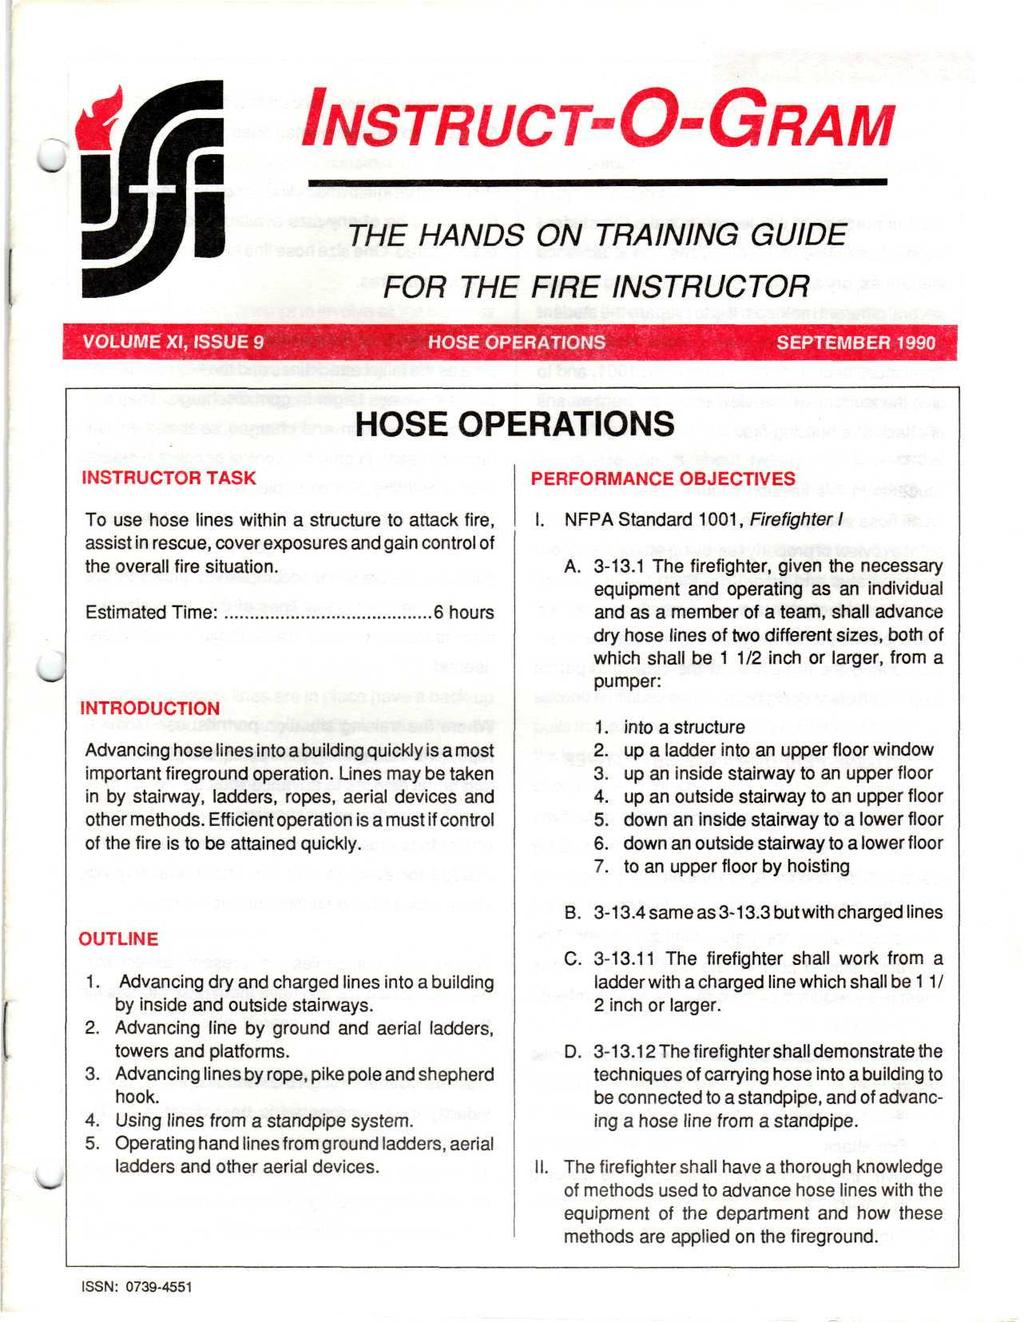 INSTRUCT-O-GRAM THE HANDS ON TRAINING GUIDE FOR THE FIRE INSTRUCTOR VOLUME XI, ISSUE 9 HOSE OPERATIONS SEPTEMBER 1990 HOSE OPERATIONS INSTRUCTOR TASK To use hose lines within a structure to attack